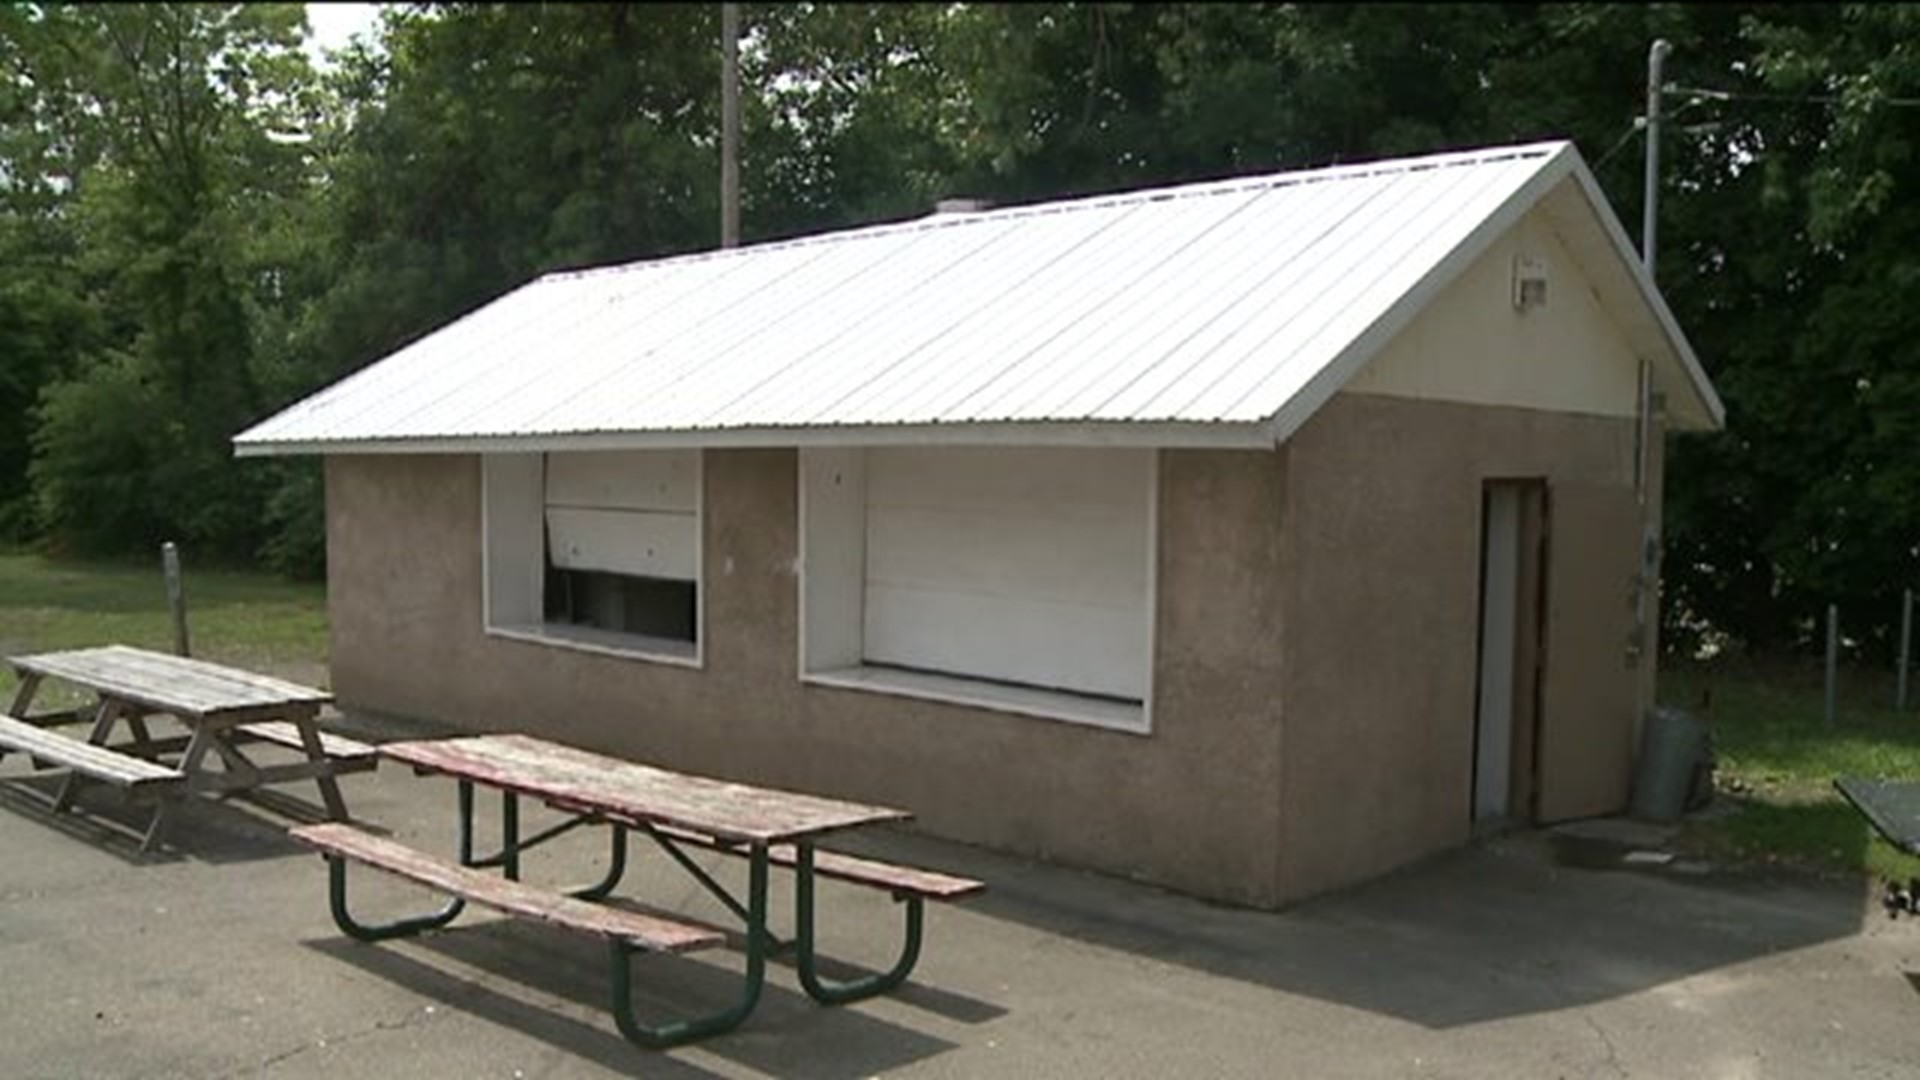 Break-in at Little League Concession Stand